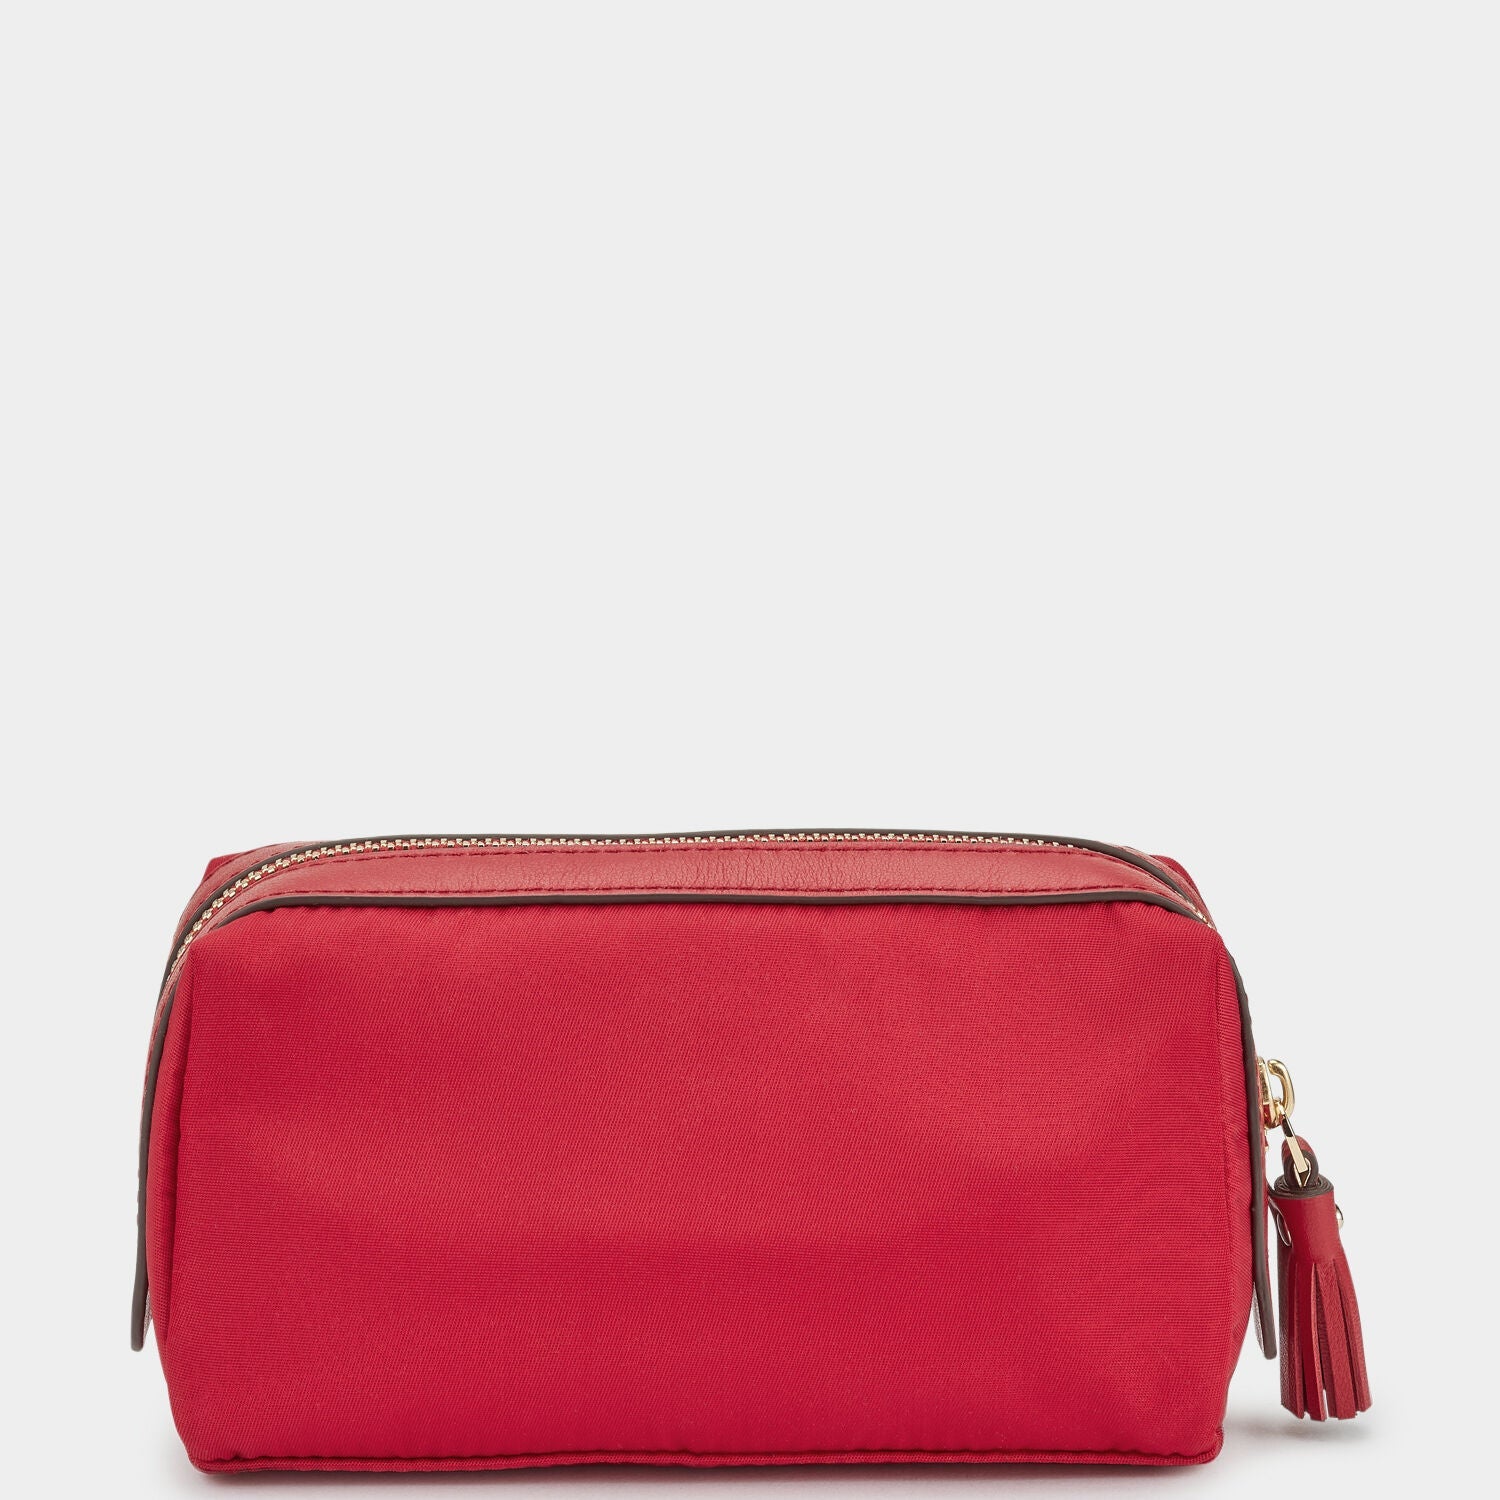 Girlie Stuff -

                  
                    Recycled Nylon in Red -
                  

                  Anya Hindmarch US
